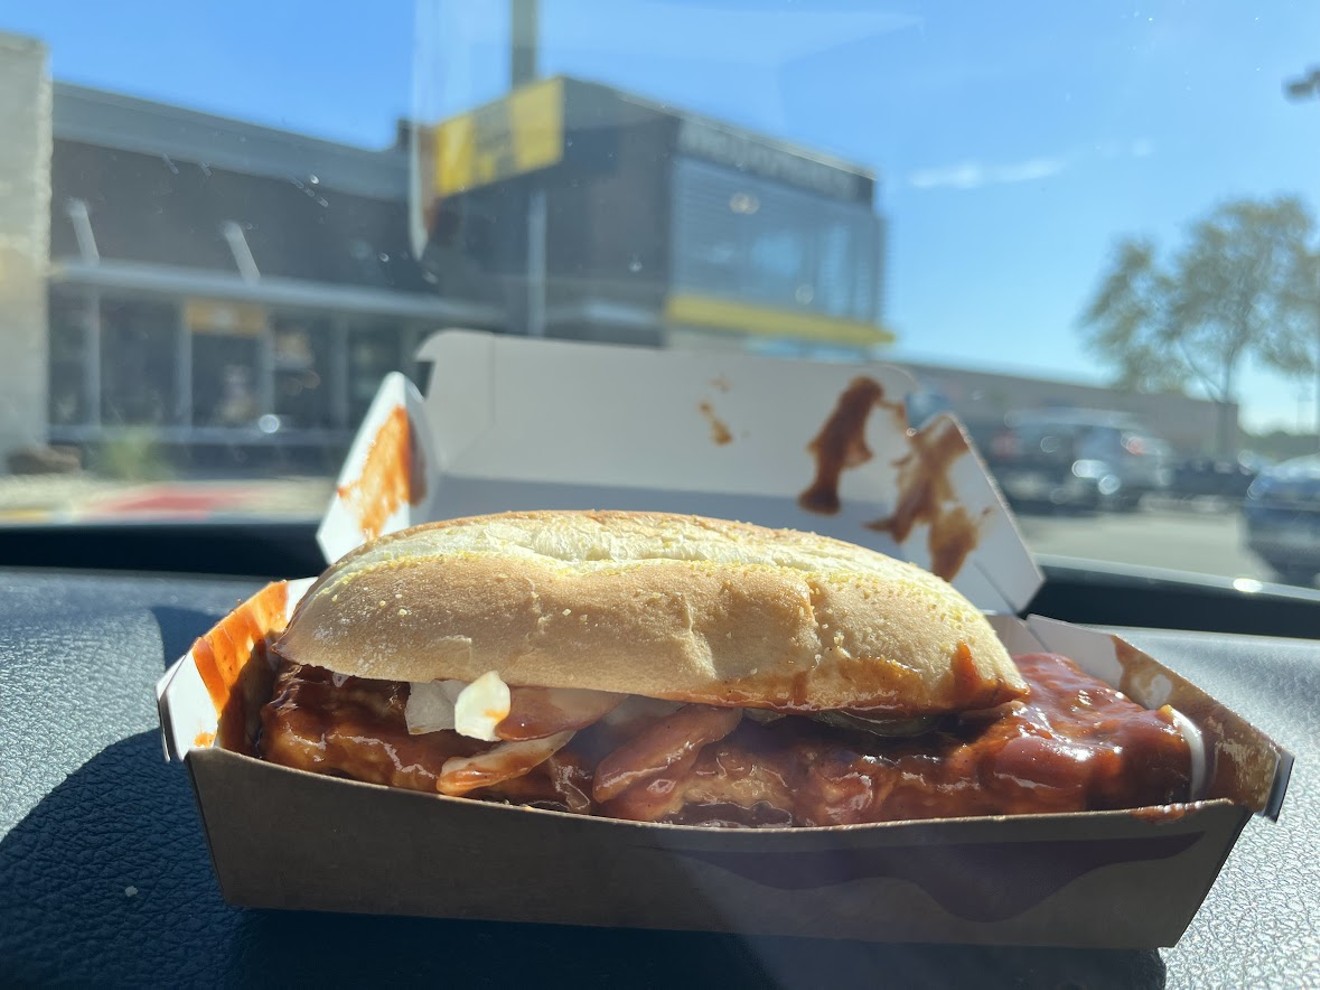 The McRib is one messy fast food anomaly.